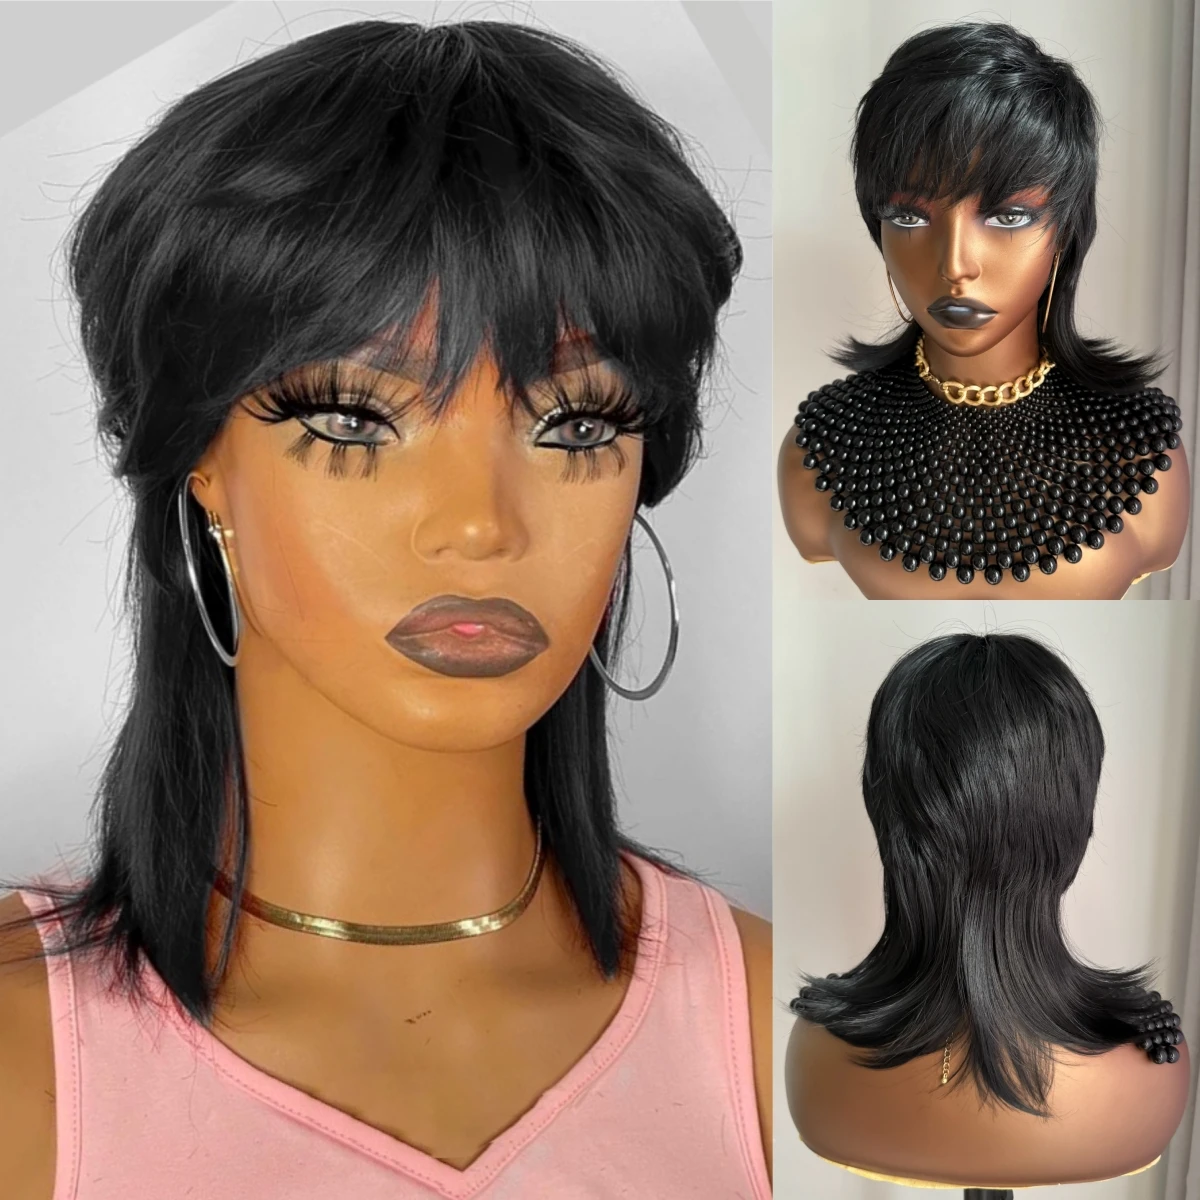 WIGERA Synthetic Short Pixie Cut Wigs On Sale Shaggy Layered 80s Mullet Wig Short Straight Bob Wigs With Bangs Machine For Women виброхвост helios shaggy